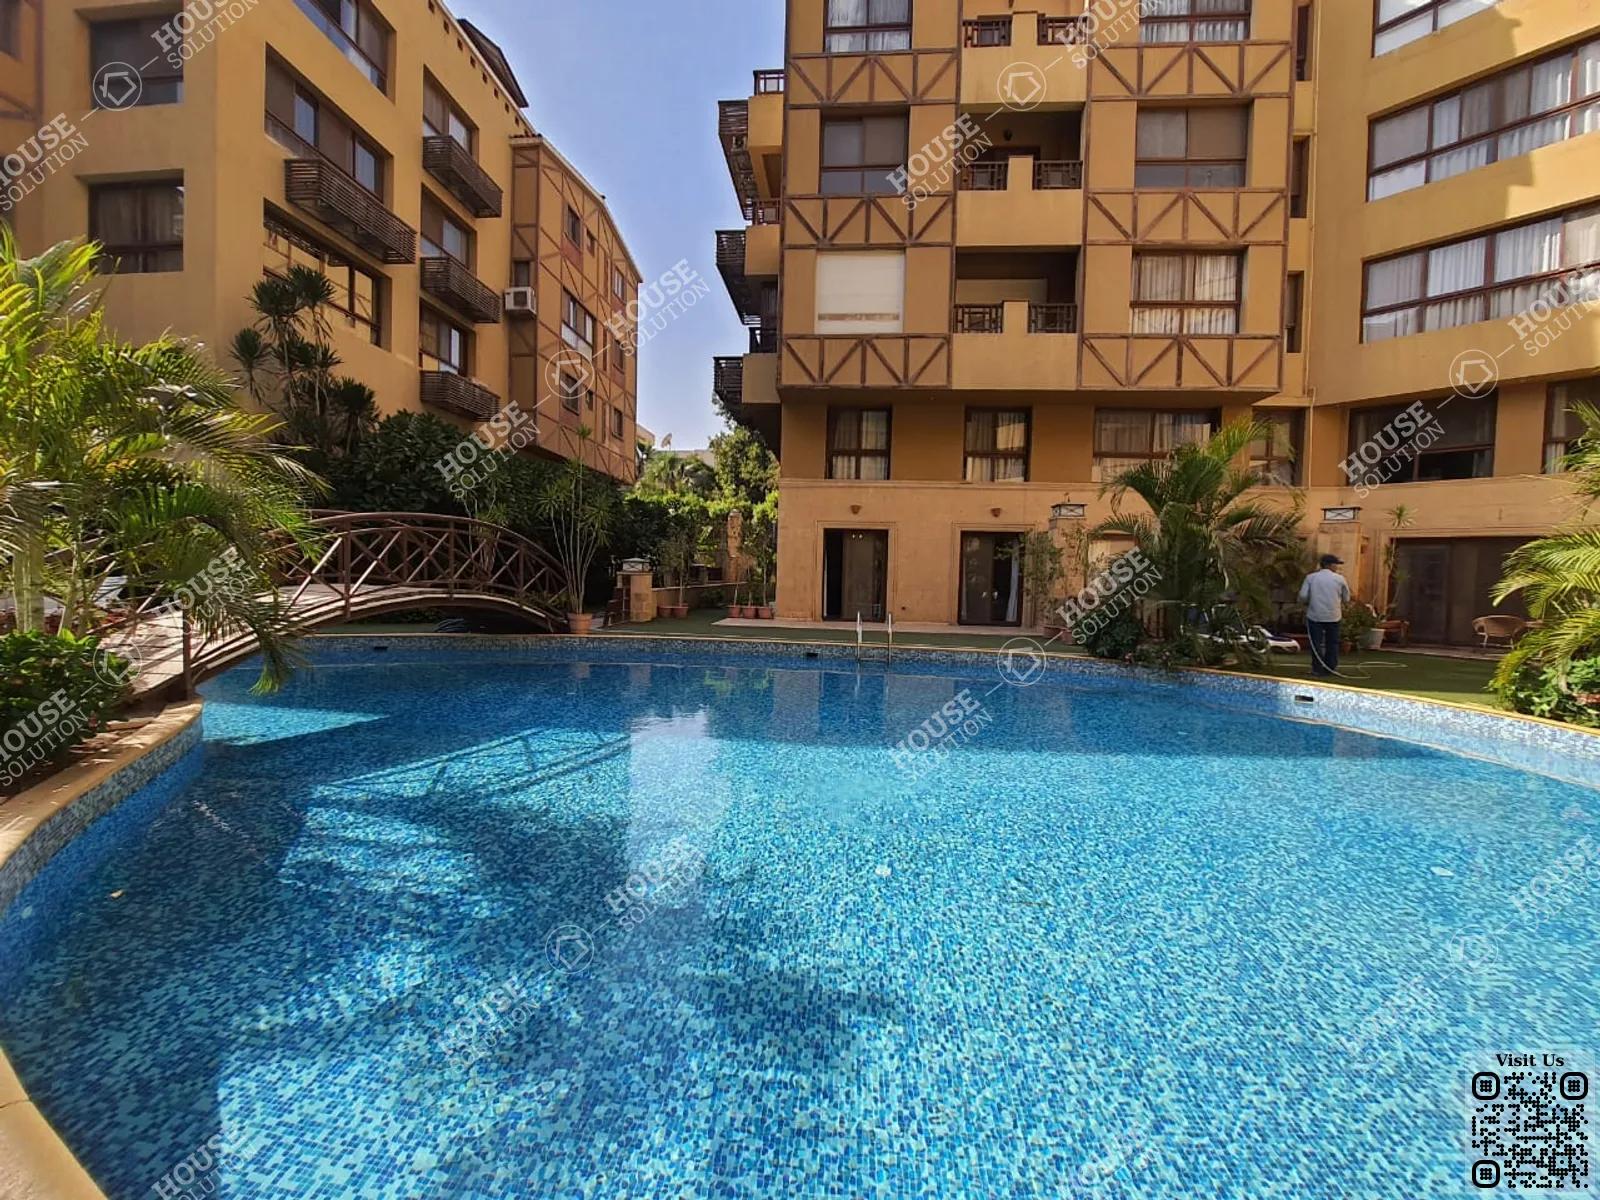 SHARED SWIMMING POOL  @ Apartments For Rent In Maadi Maadi Sarayat Area: 180 m² consists of 3 Bedrooms 3 Bathrooms Furnished 5 stars #5499-2